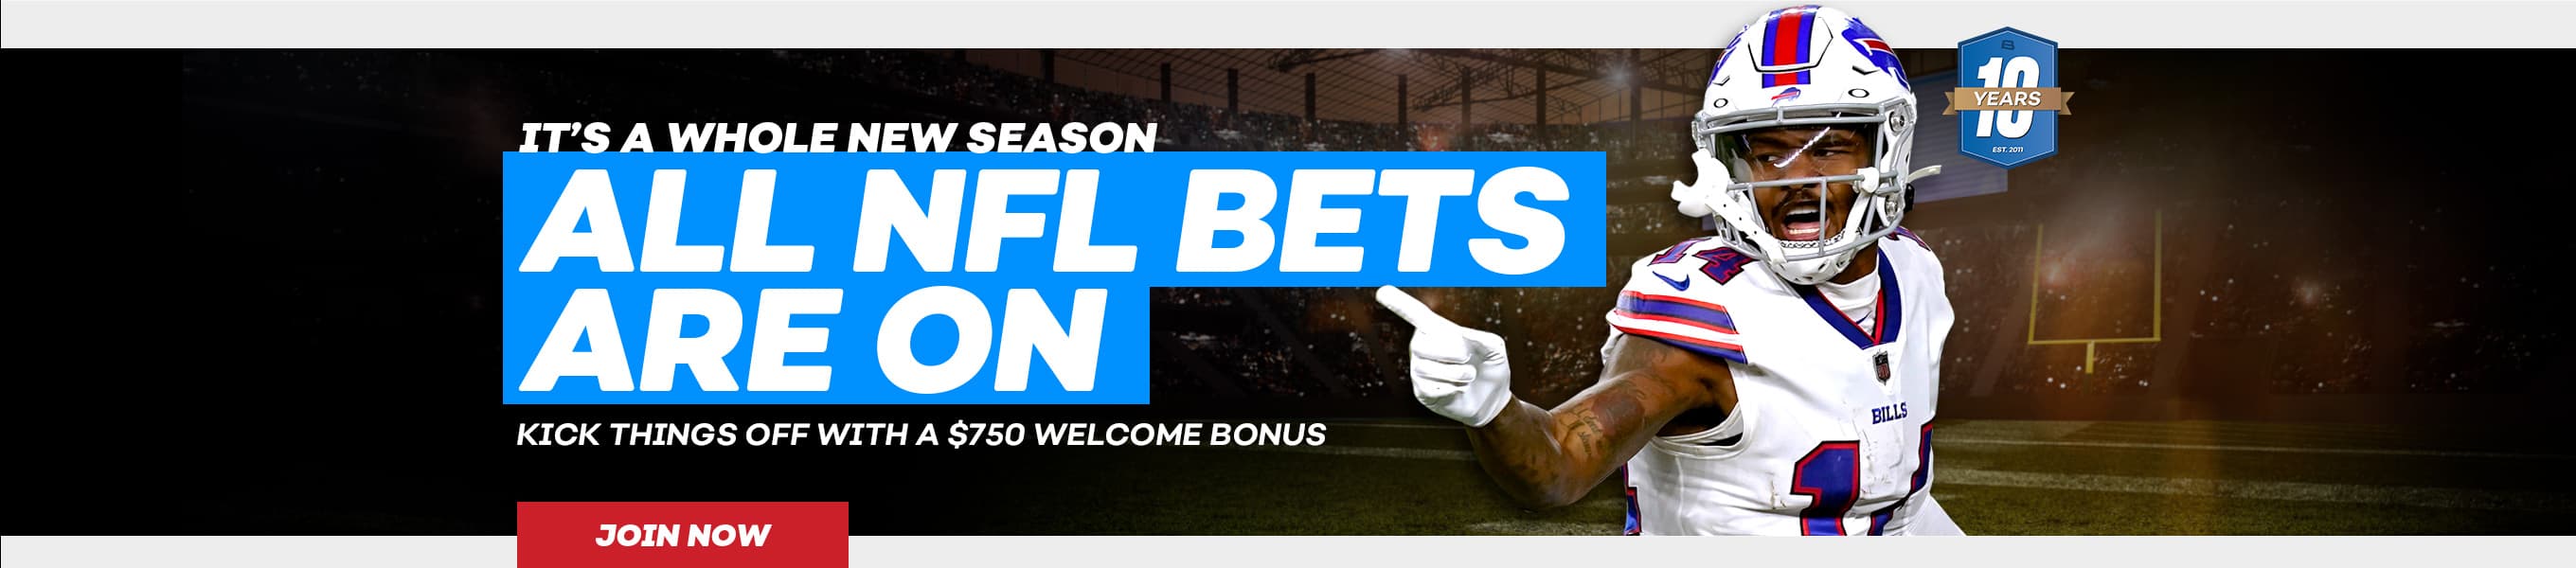 Bet on the NFL!